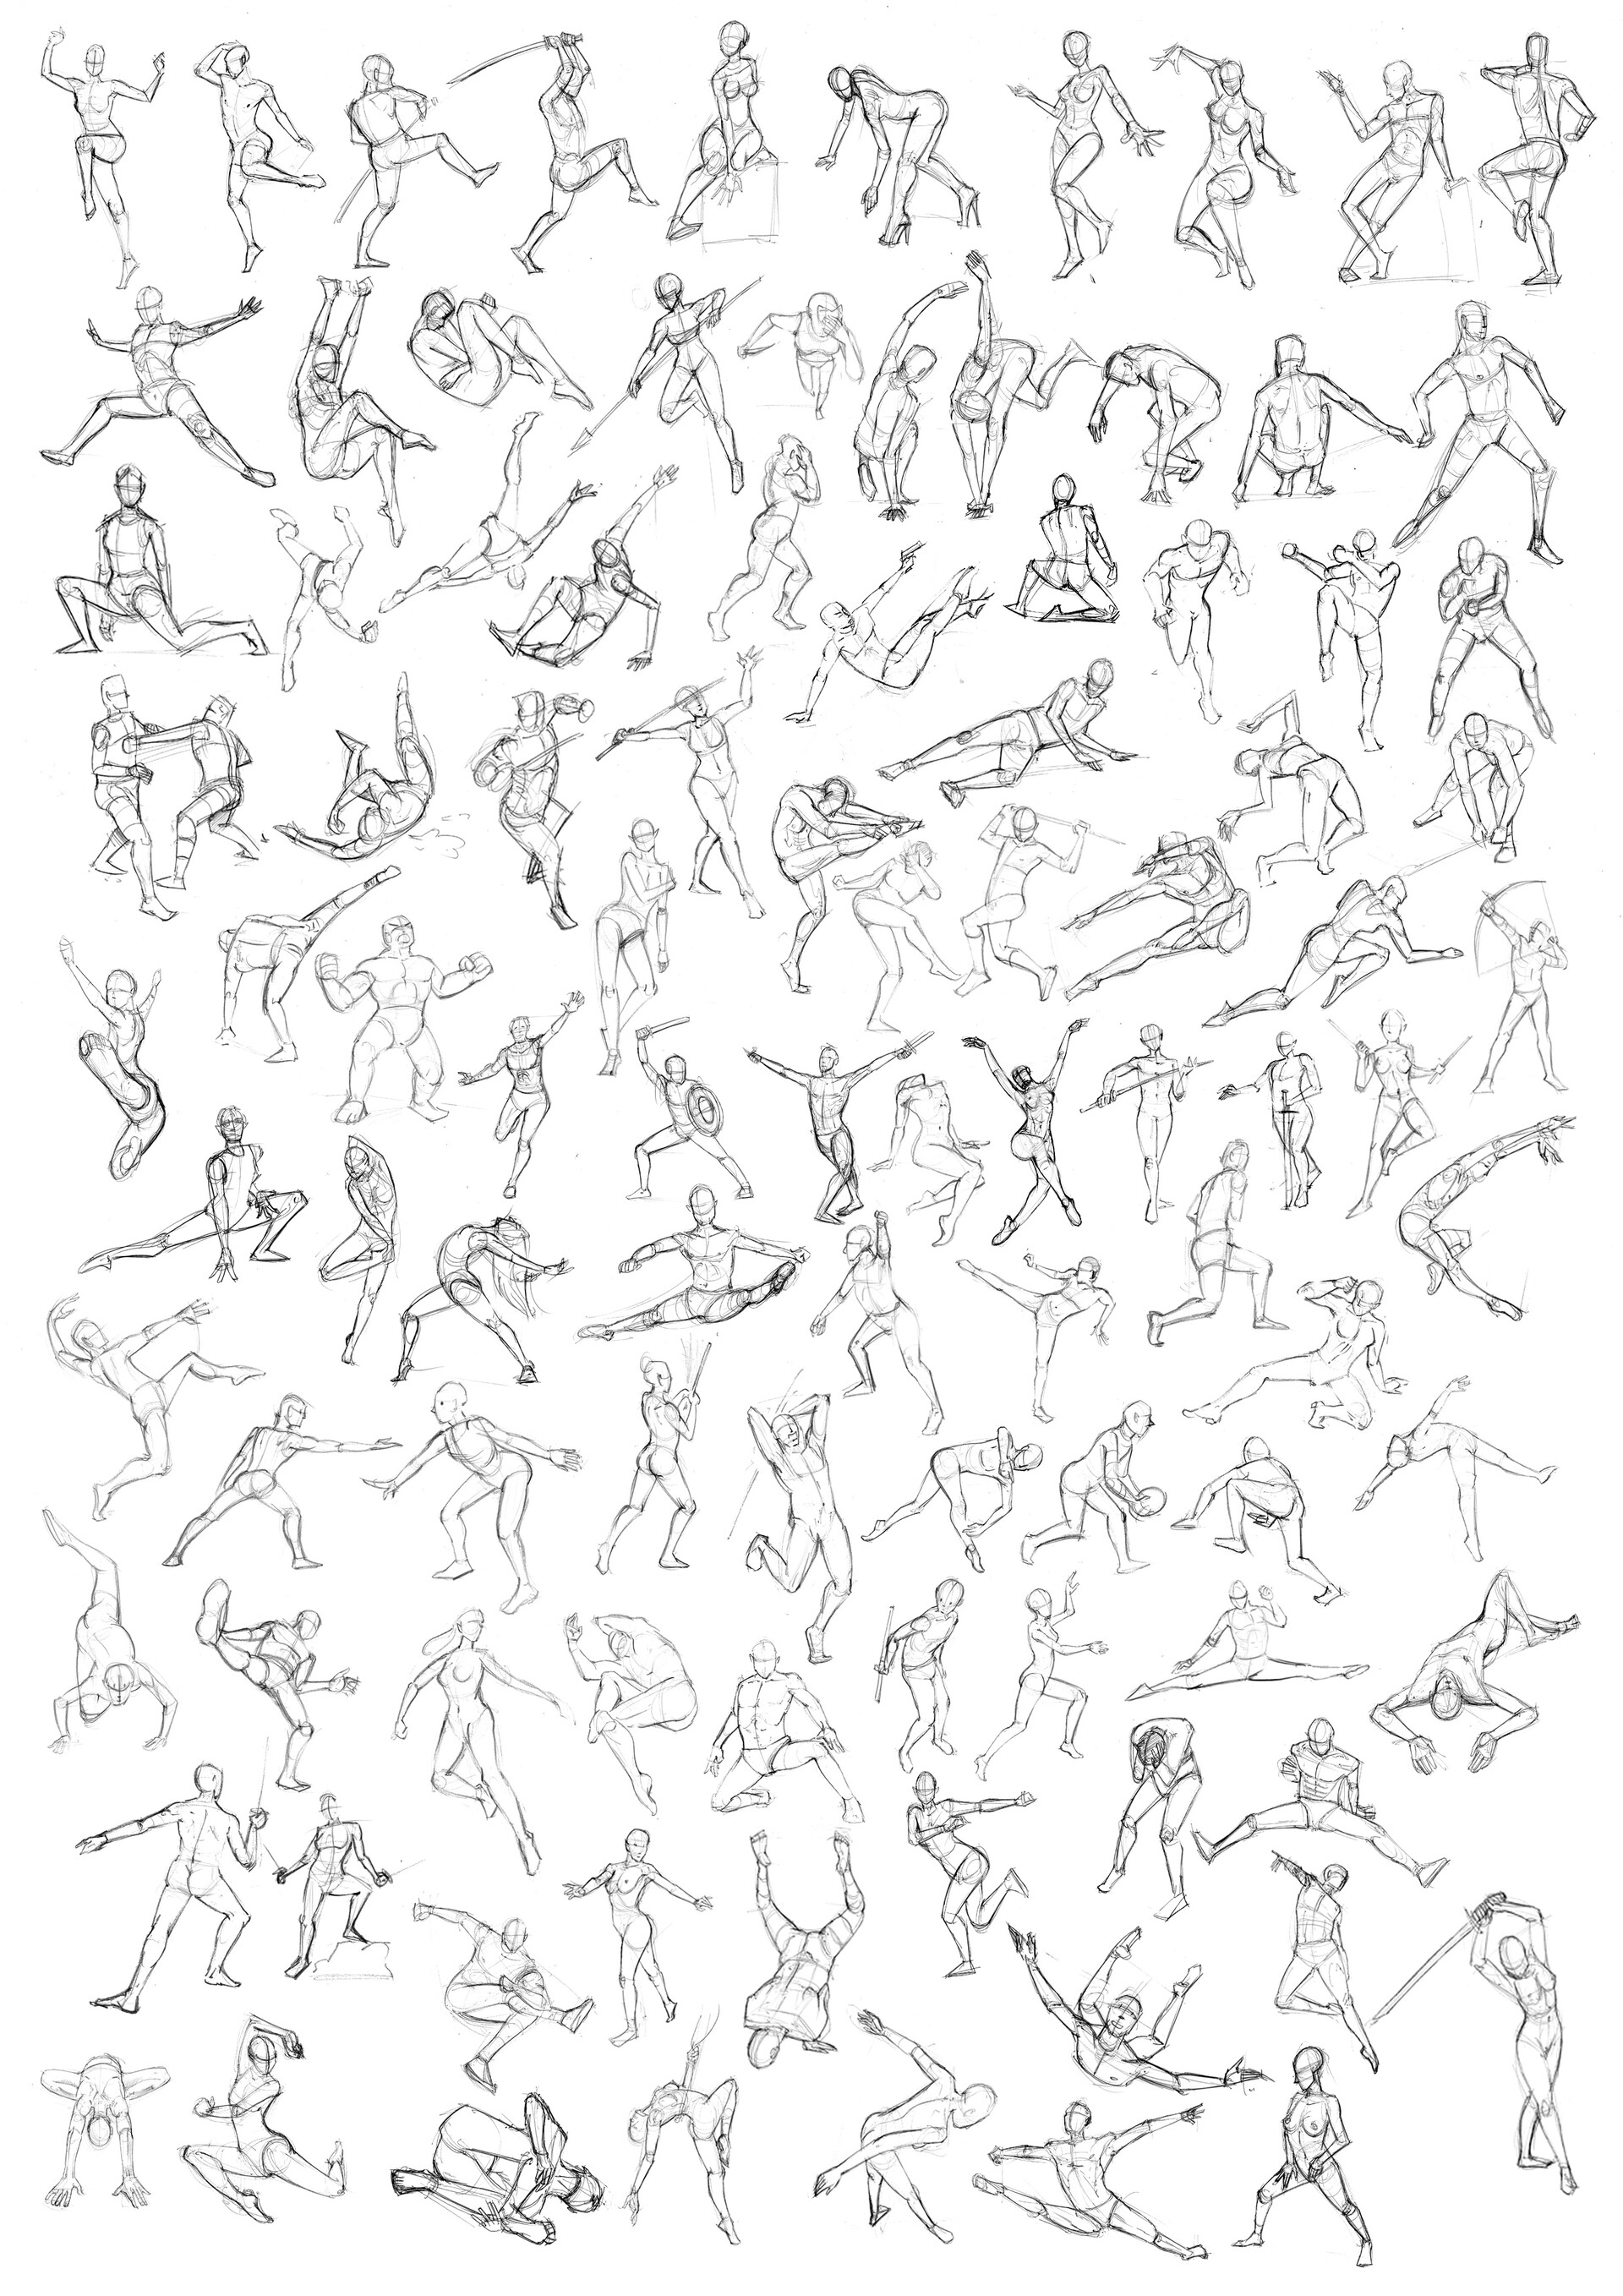 Drew some action poses in photoshop | Male body art, Action poses, Anime  poses